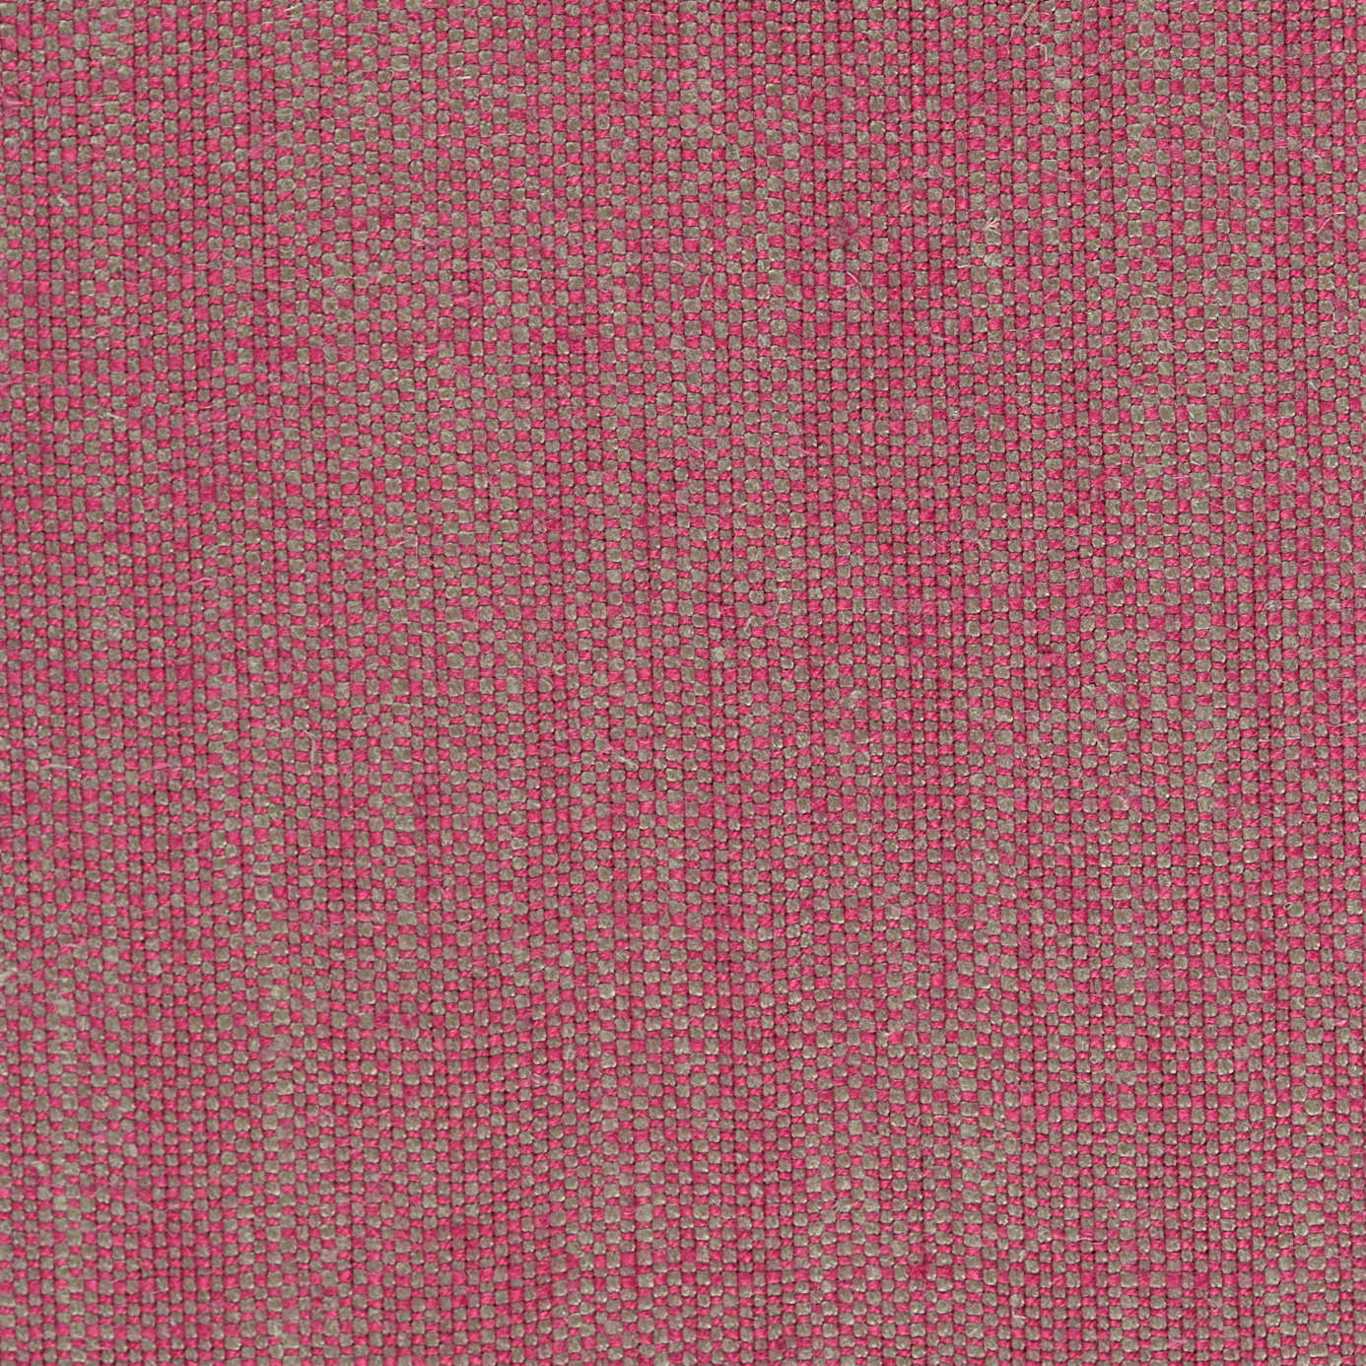 Atom Fabric by Harlequin - HTEX440160 - Punch